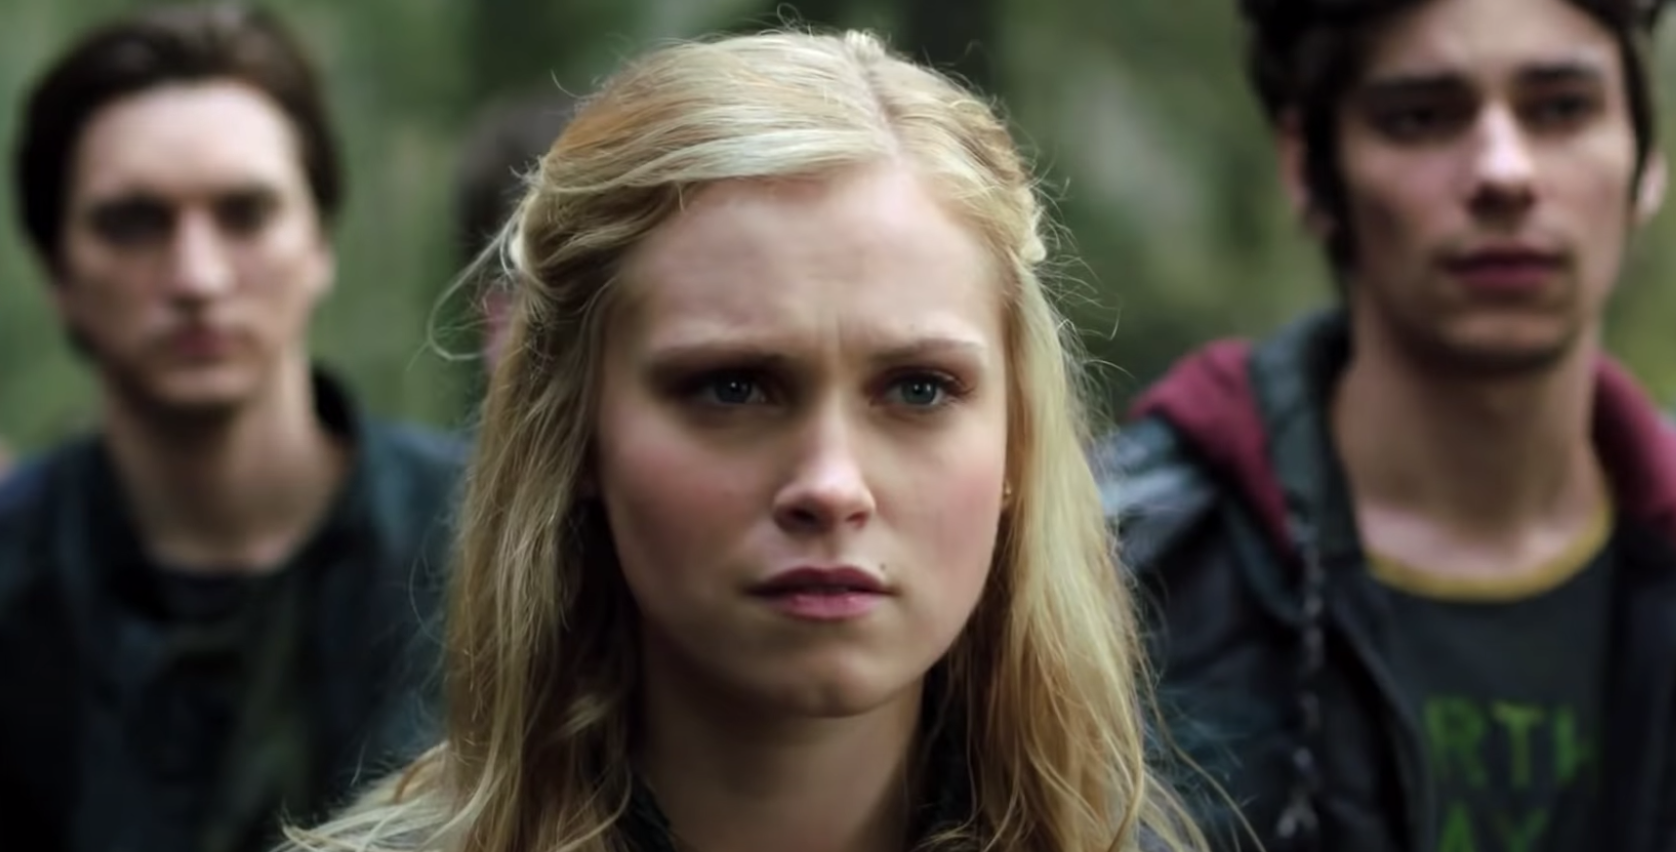 Murphy, Clarke, and Jasper stand on earth with concerned looks in &quot;The 100.&quot;